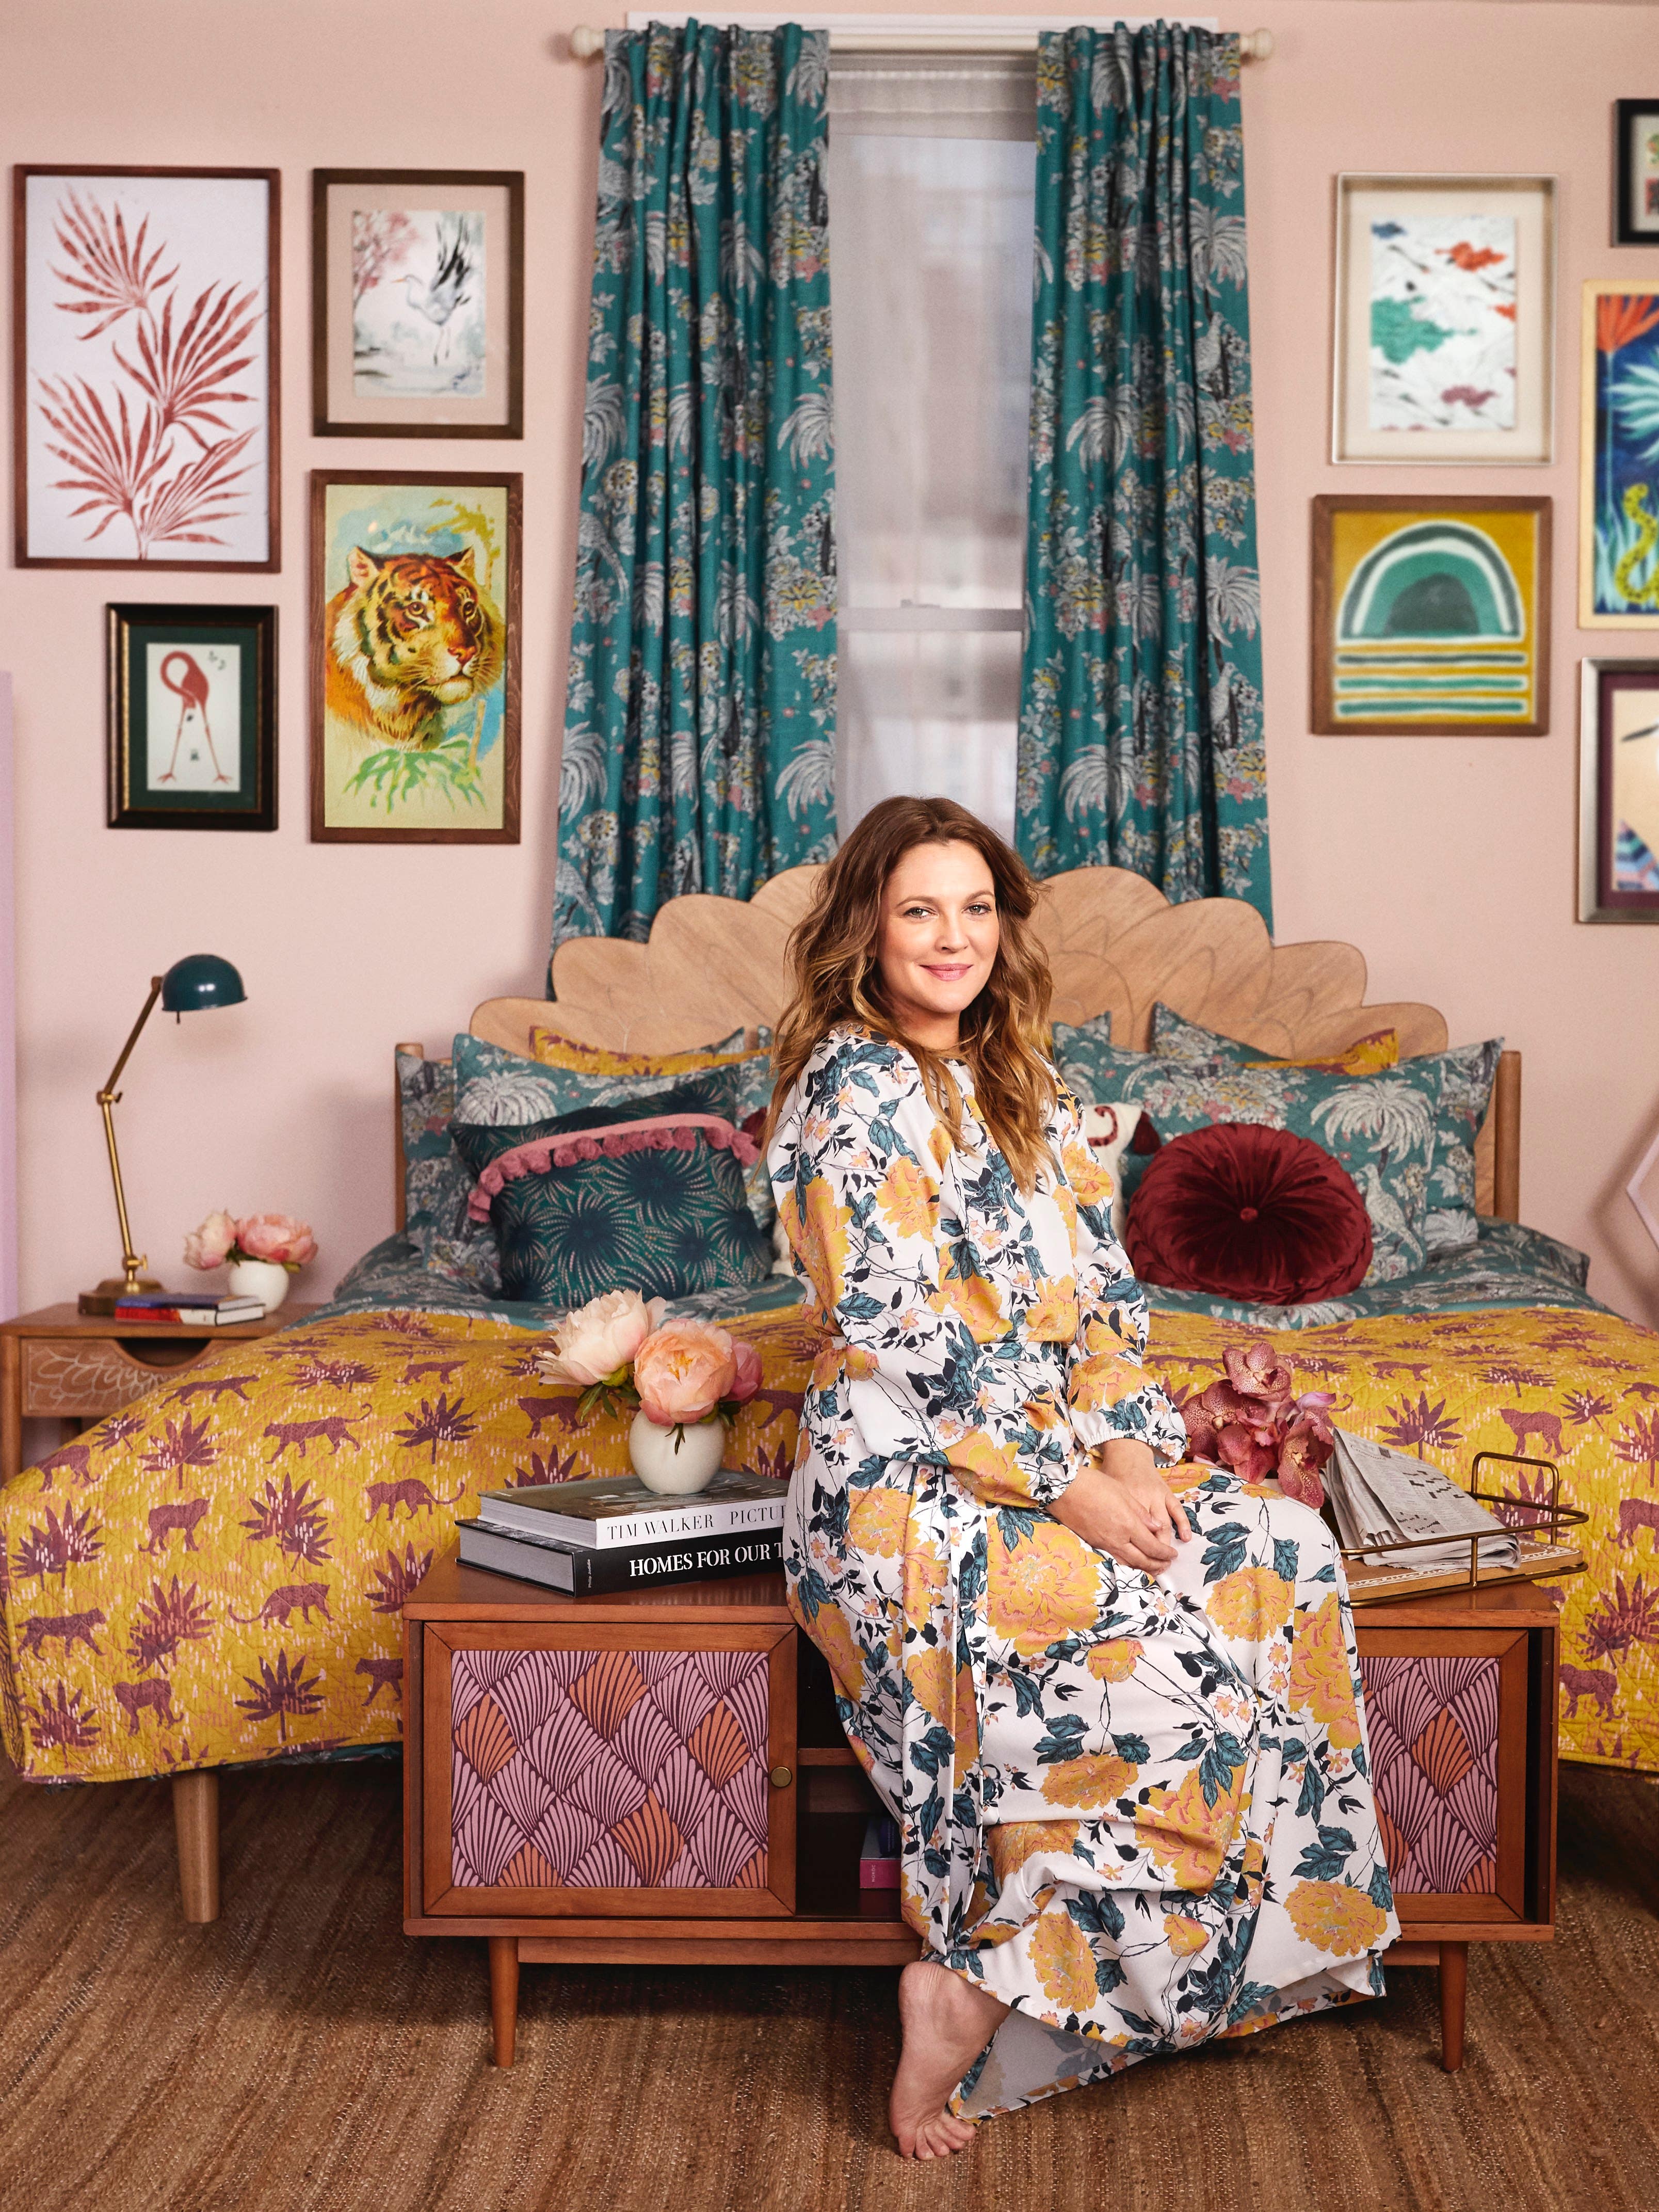 Drew Barrymore in a colorful room full of Flower Home decor.